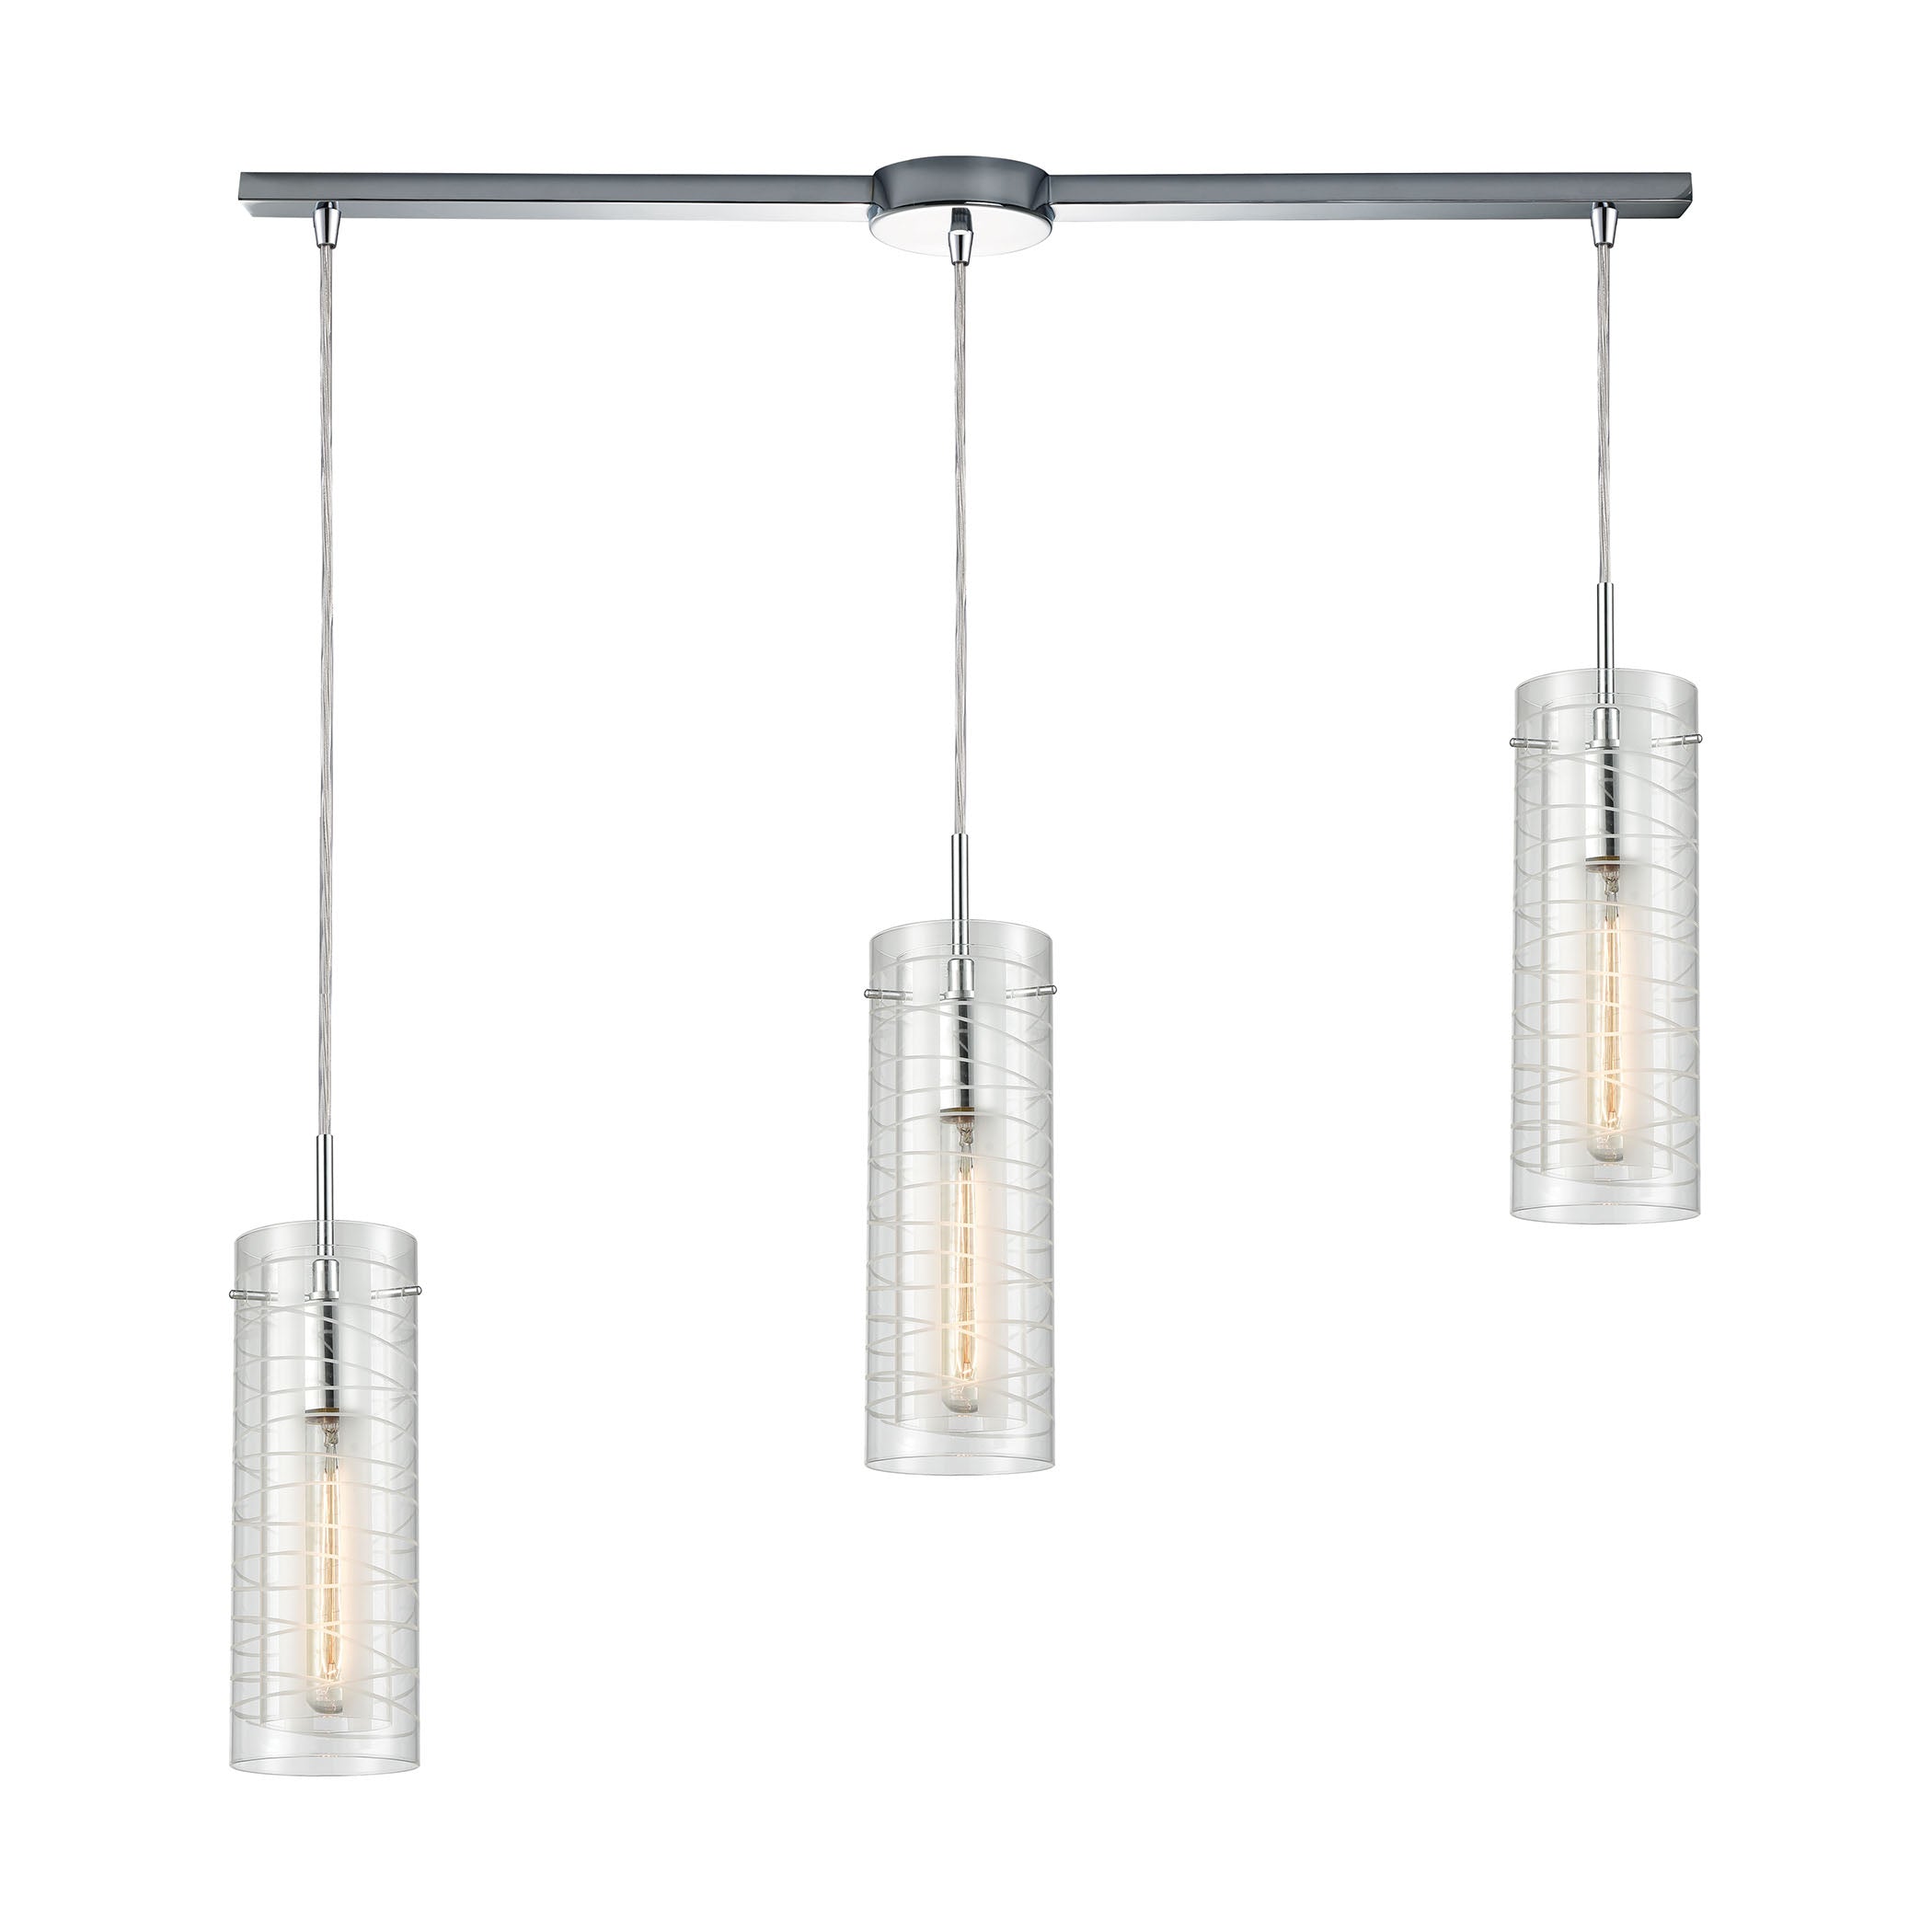 ELK Lighting 56595/3L Swirl 3-Light Linear Mini Pendant Fixture in Polished Chrome with Clear Etched Glass